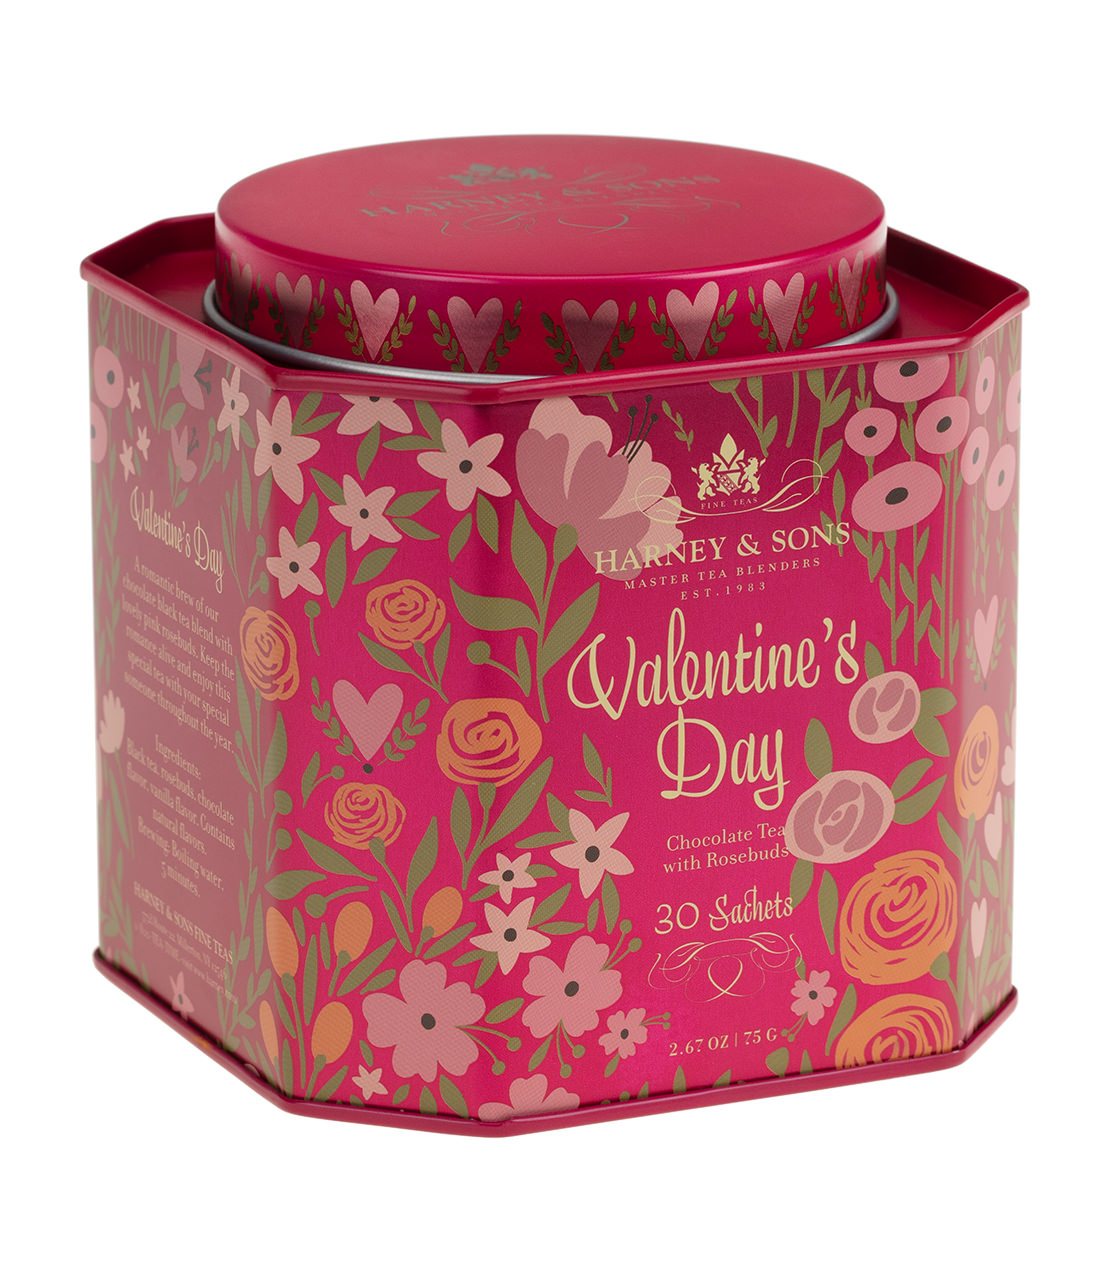 Valentine's Day - Tin of 30 Sachets - Chocolate Tea with Rosebuds - Harney & Sons Fine Teas Europe